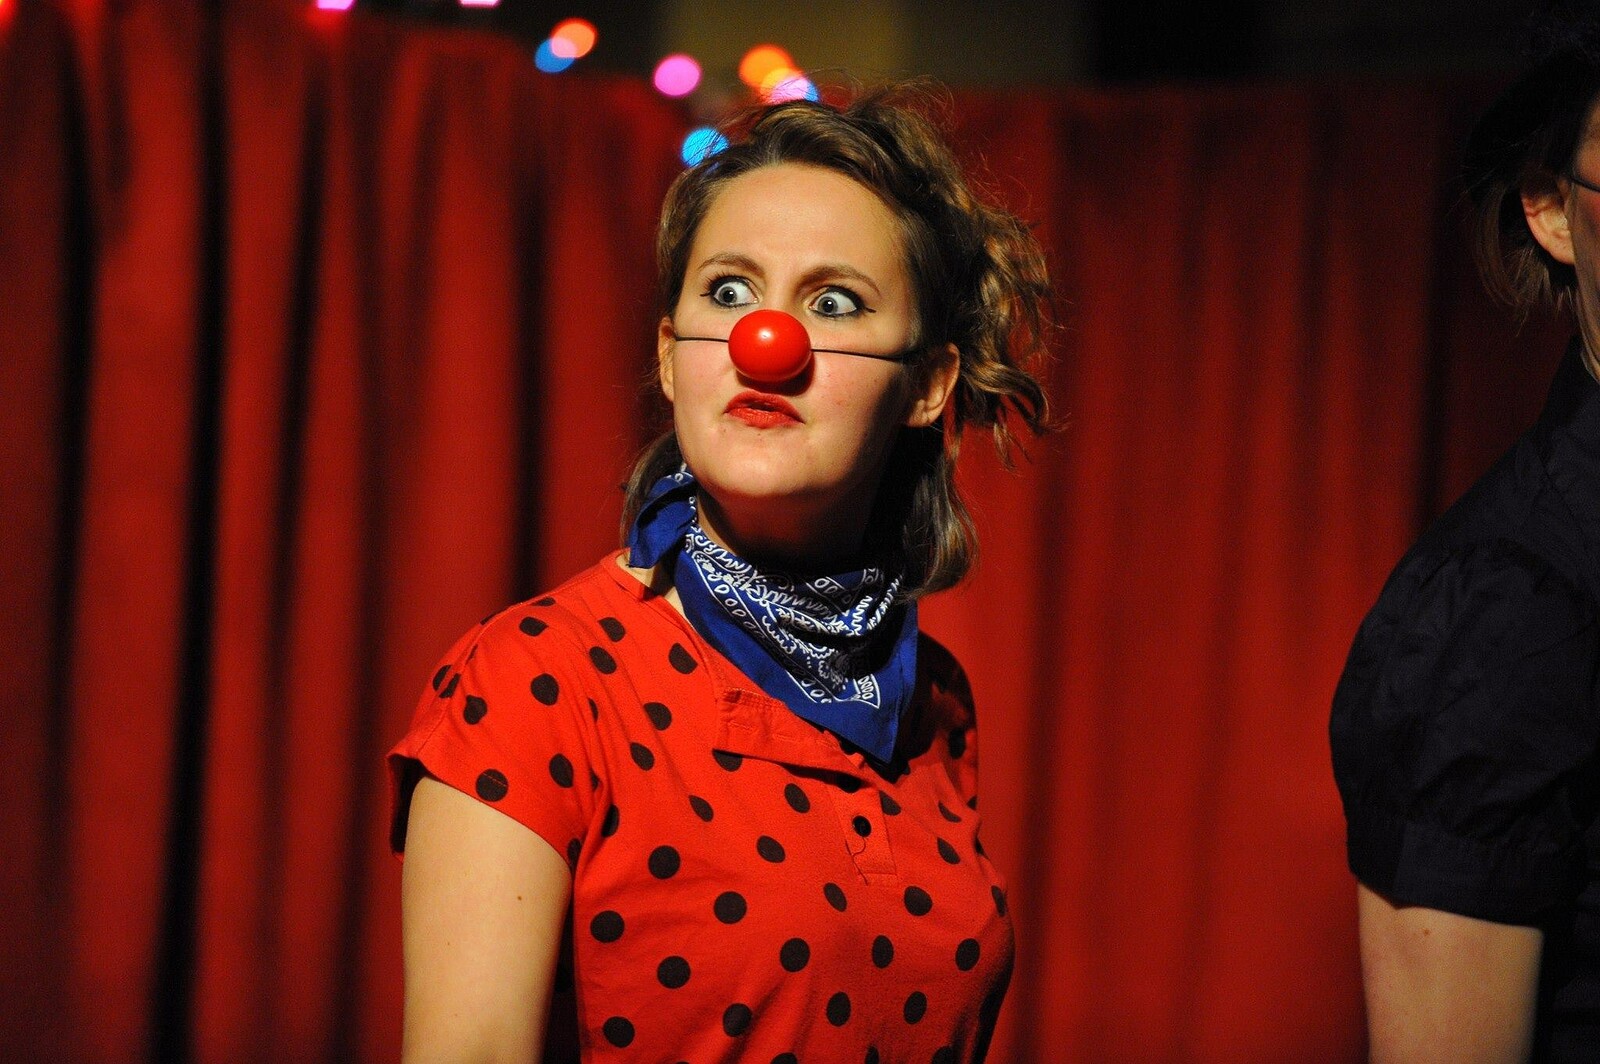 The Red Nose: Theatre Clown Actor Training tickets, Space 238 – buy ...